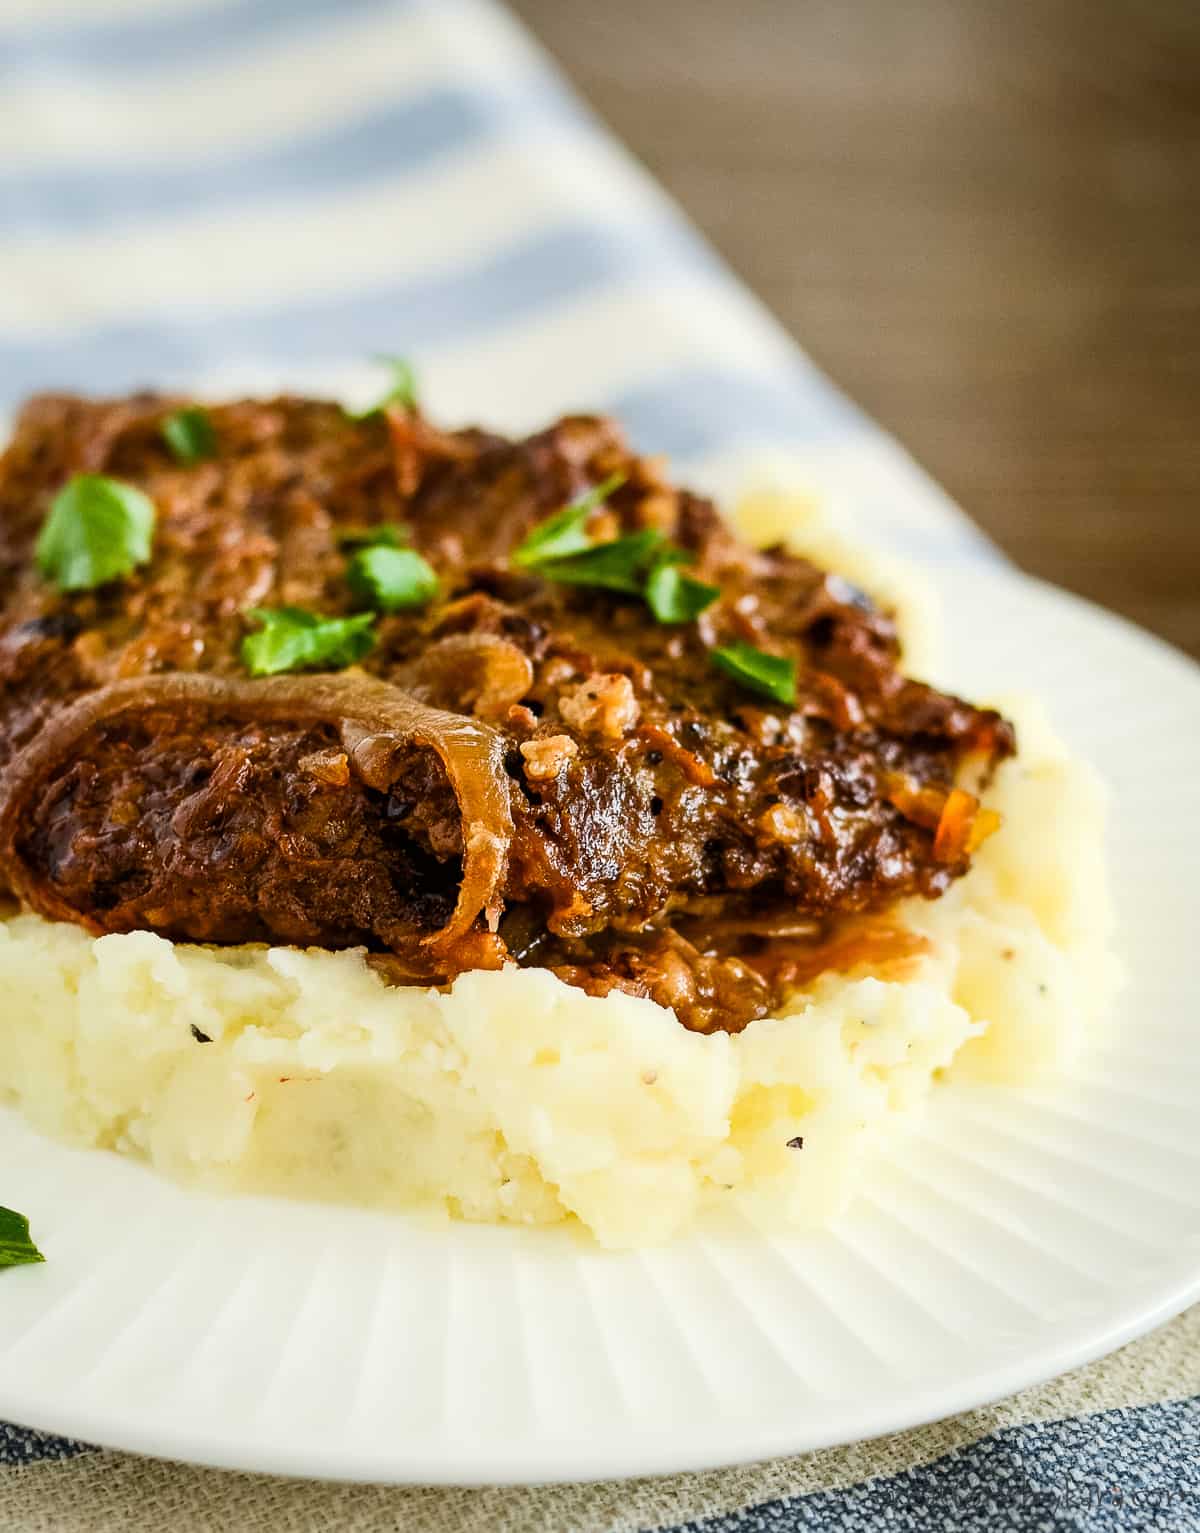 plate of mashed potatoes, cube steak, and gravy, garnished with parsley